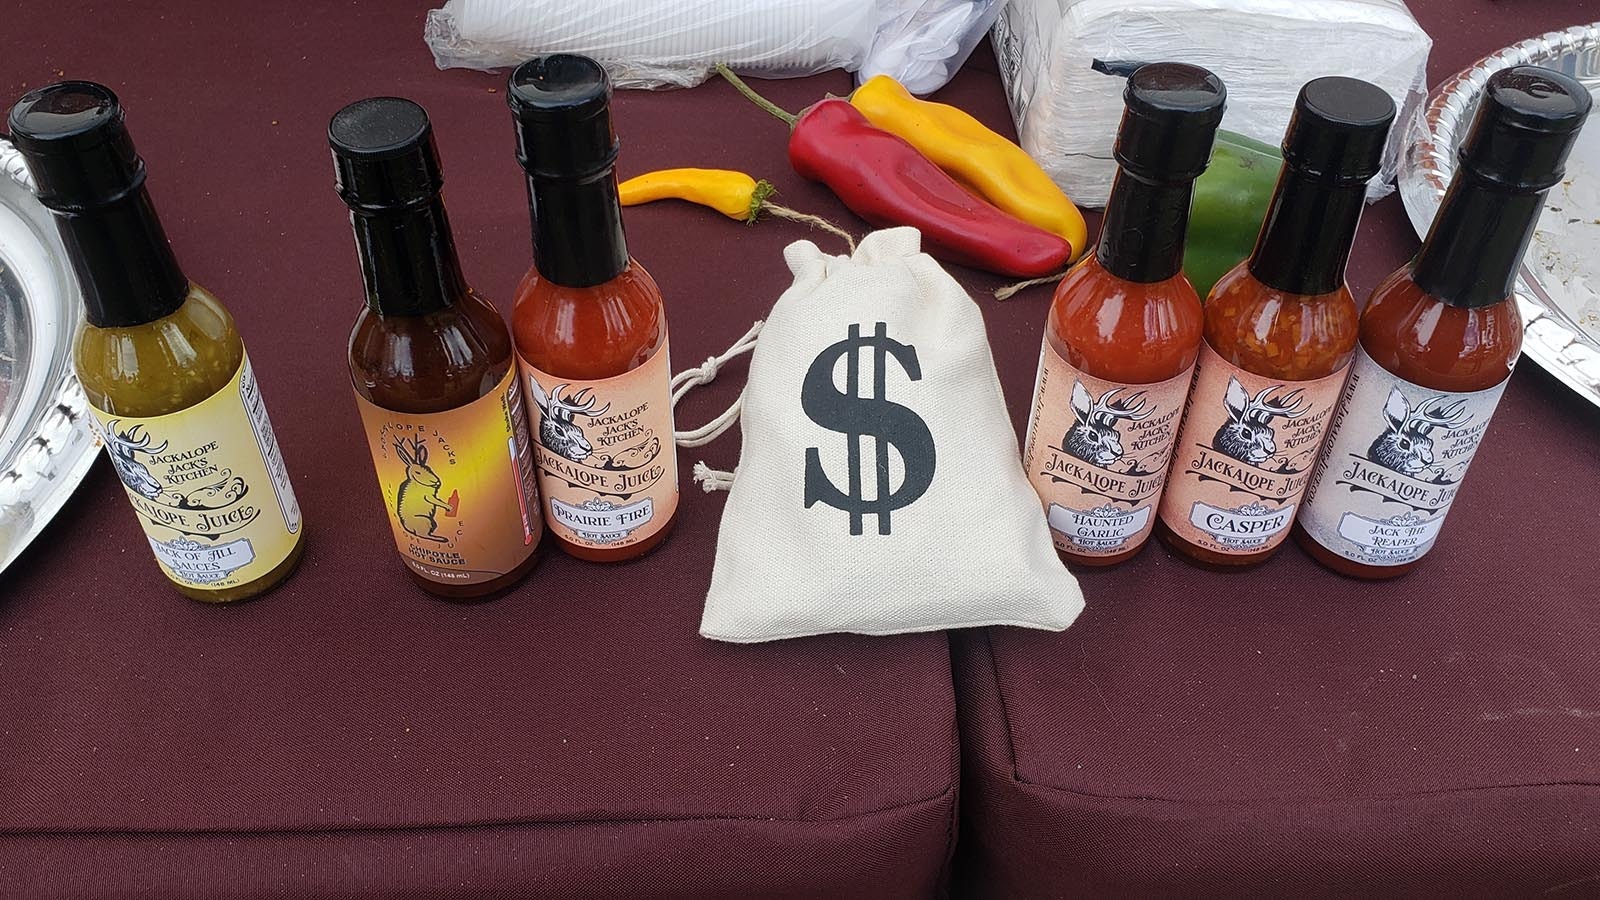 A few of Peter Inells' Jackalope Juice sauces on display at the Chugwater Chili Cookoff.